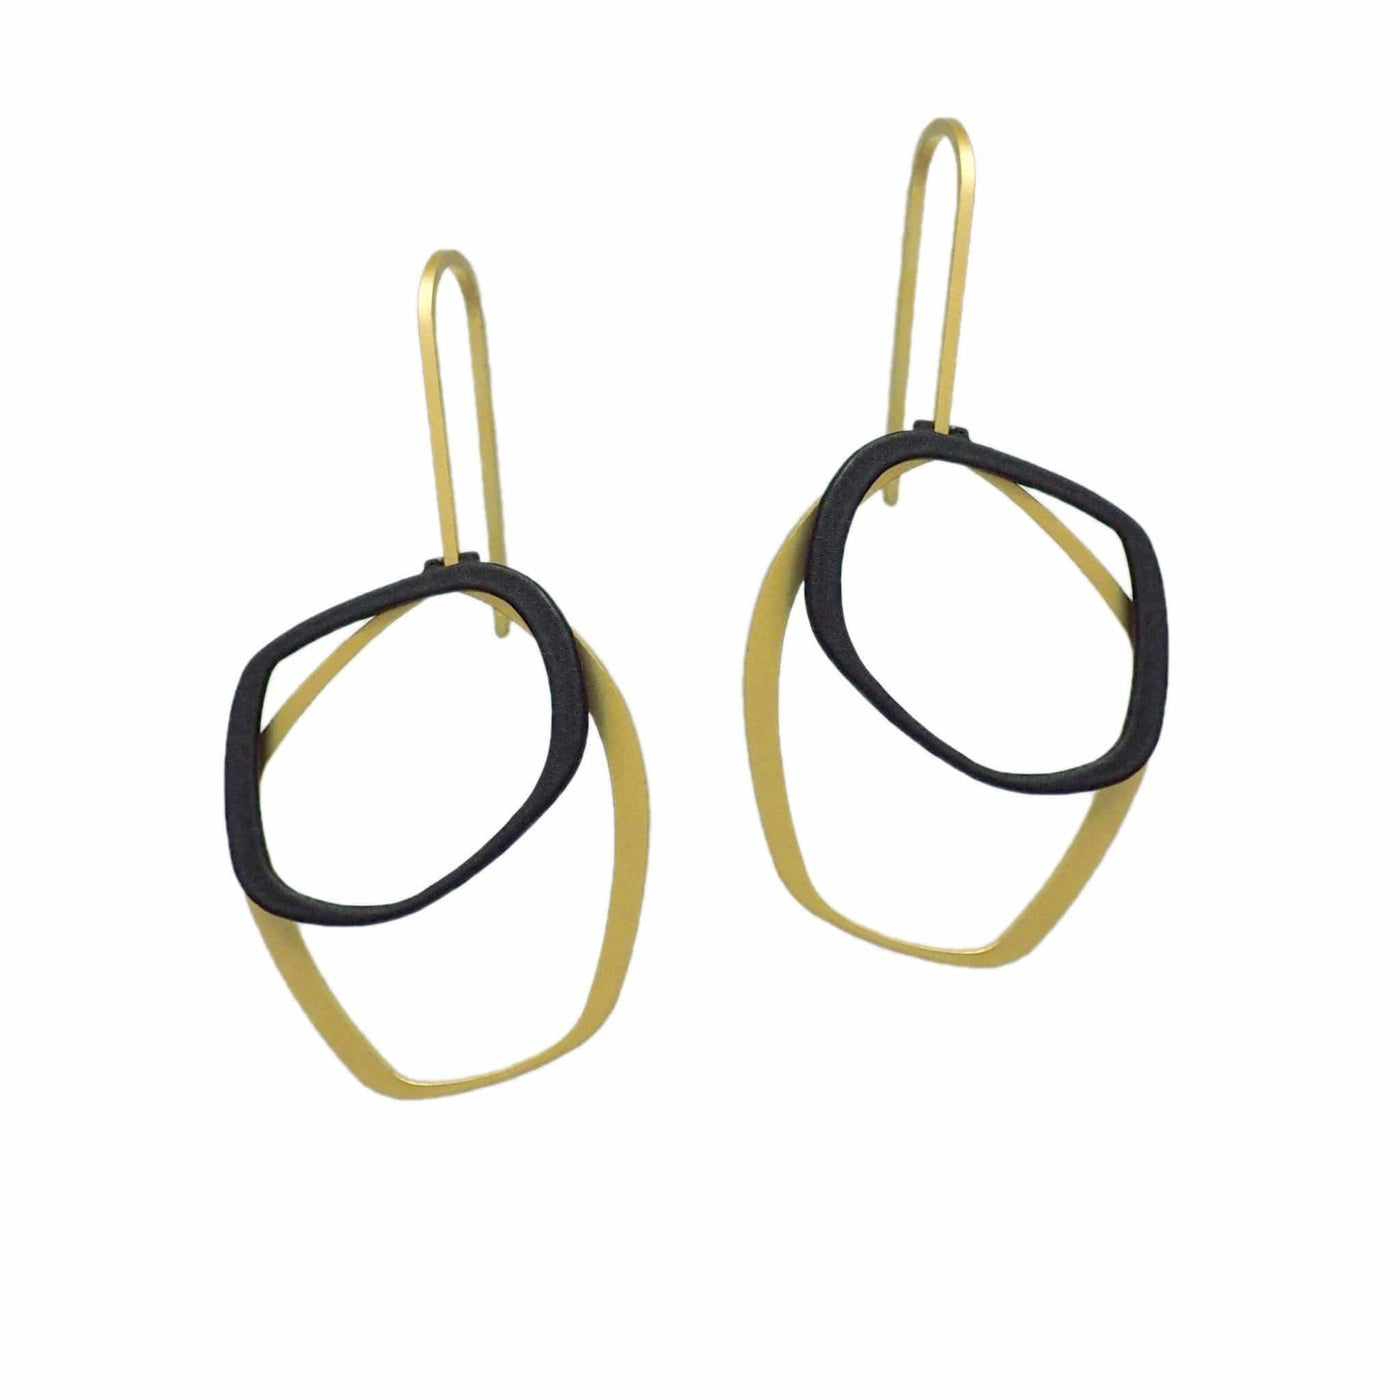 X2 Small Outline Earrings - Raw/ Black - inSync design